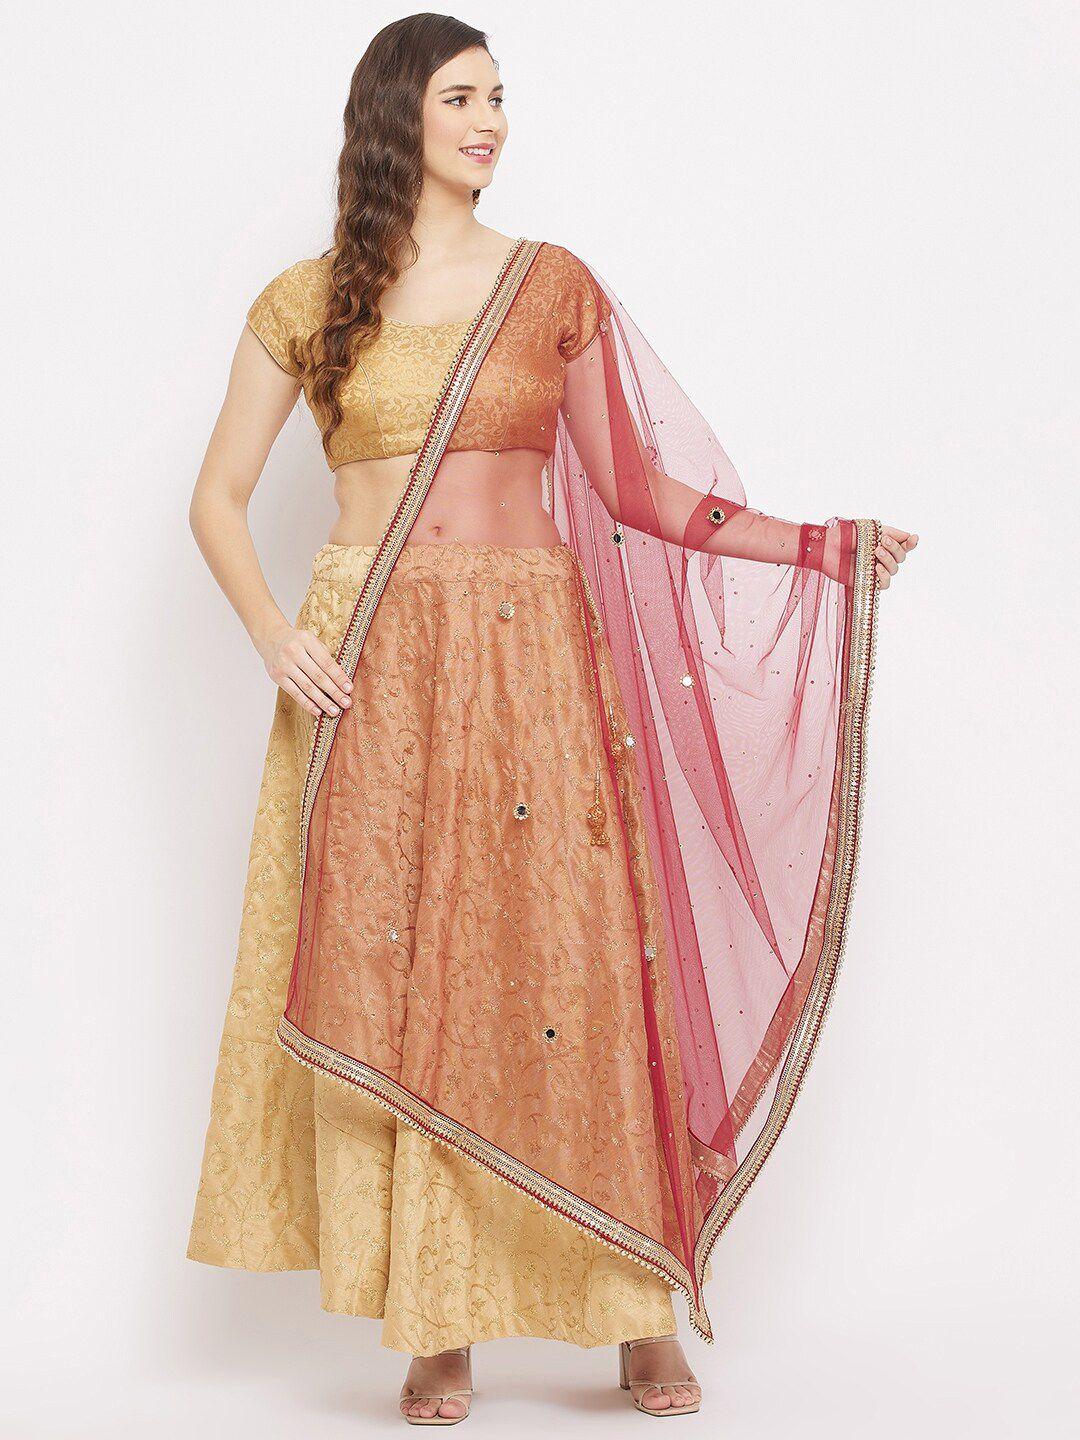 clora creation maroon & gold-toned ethnic motifs embroidered dupatta with beads and stones